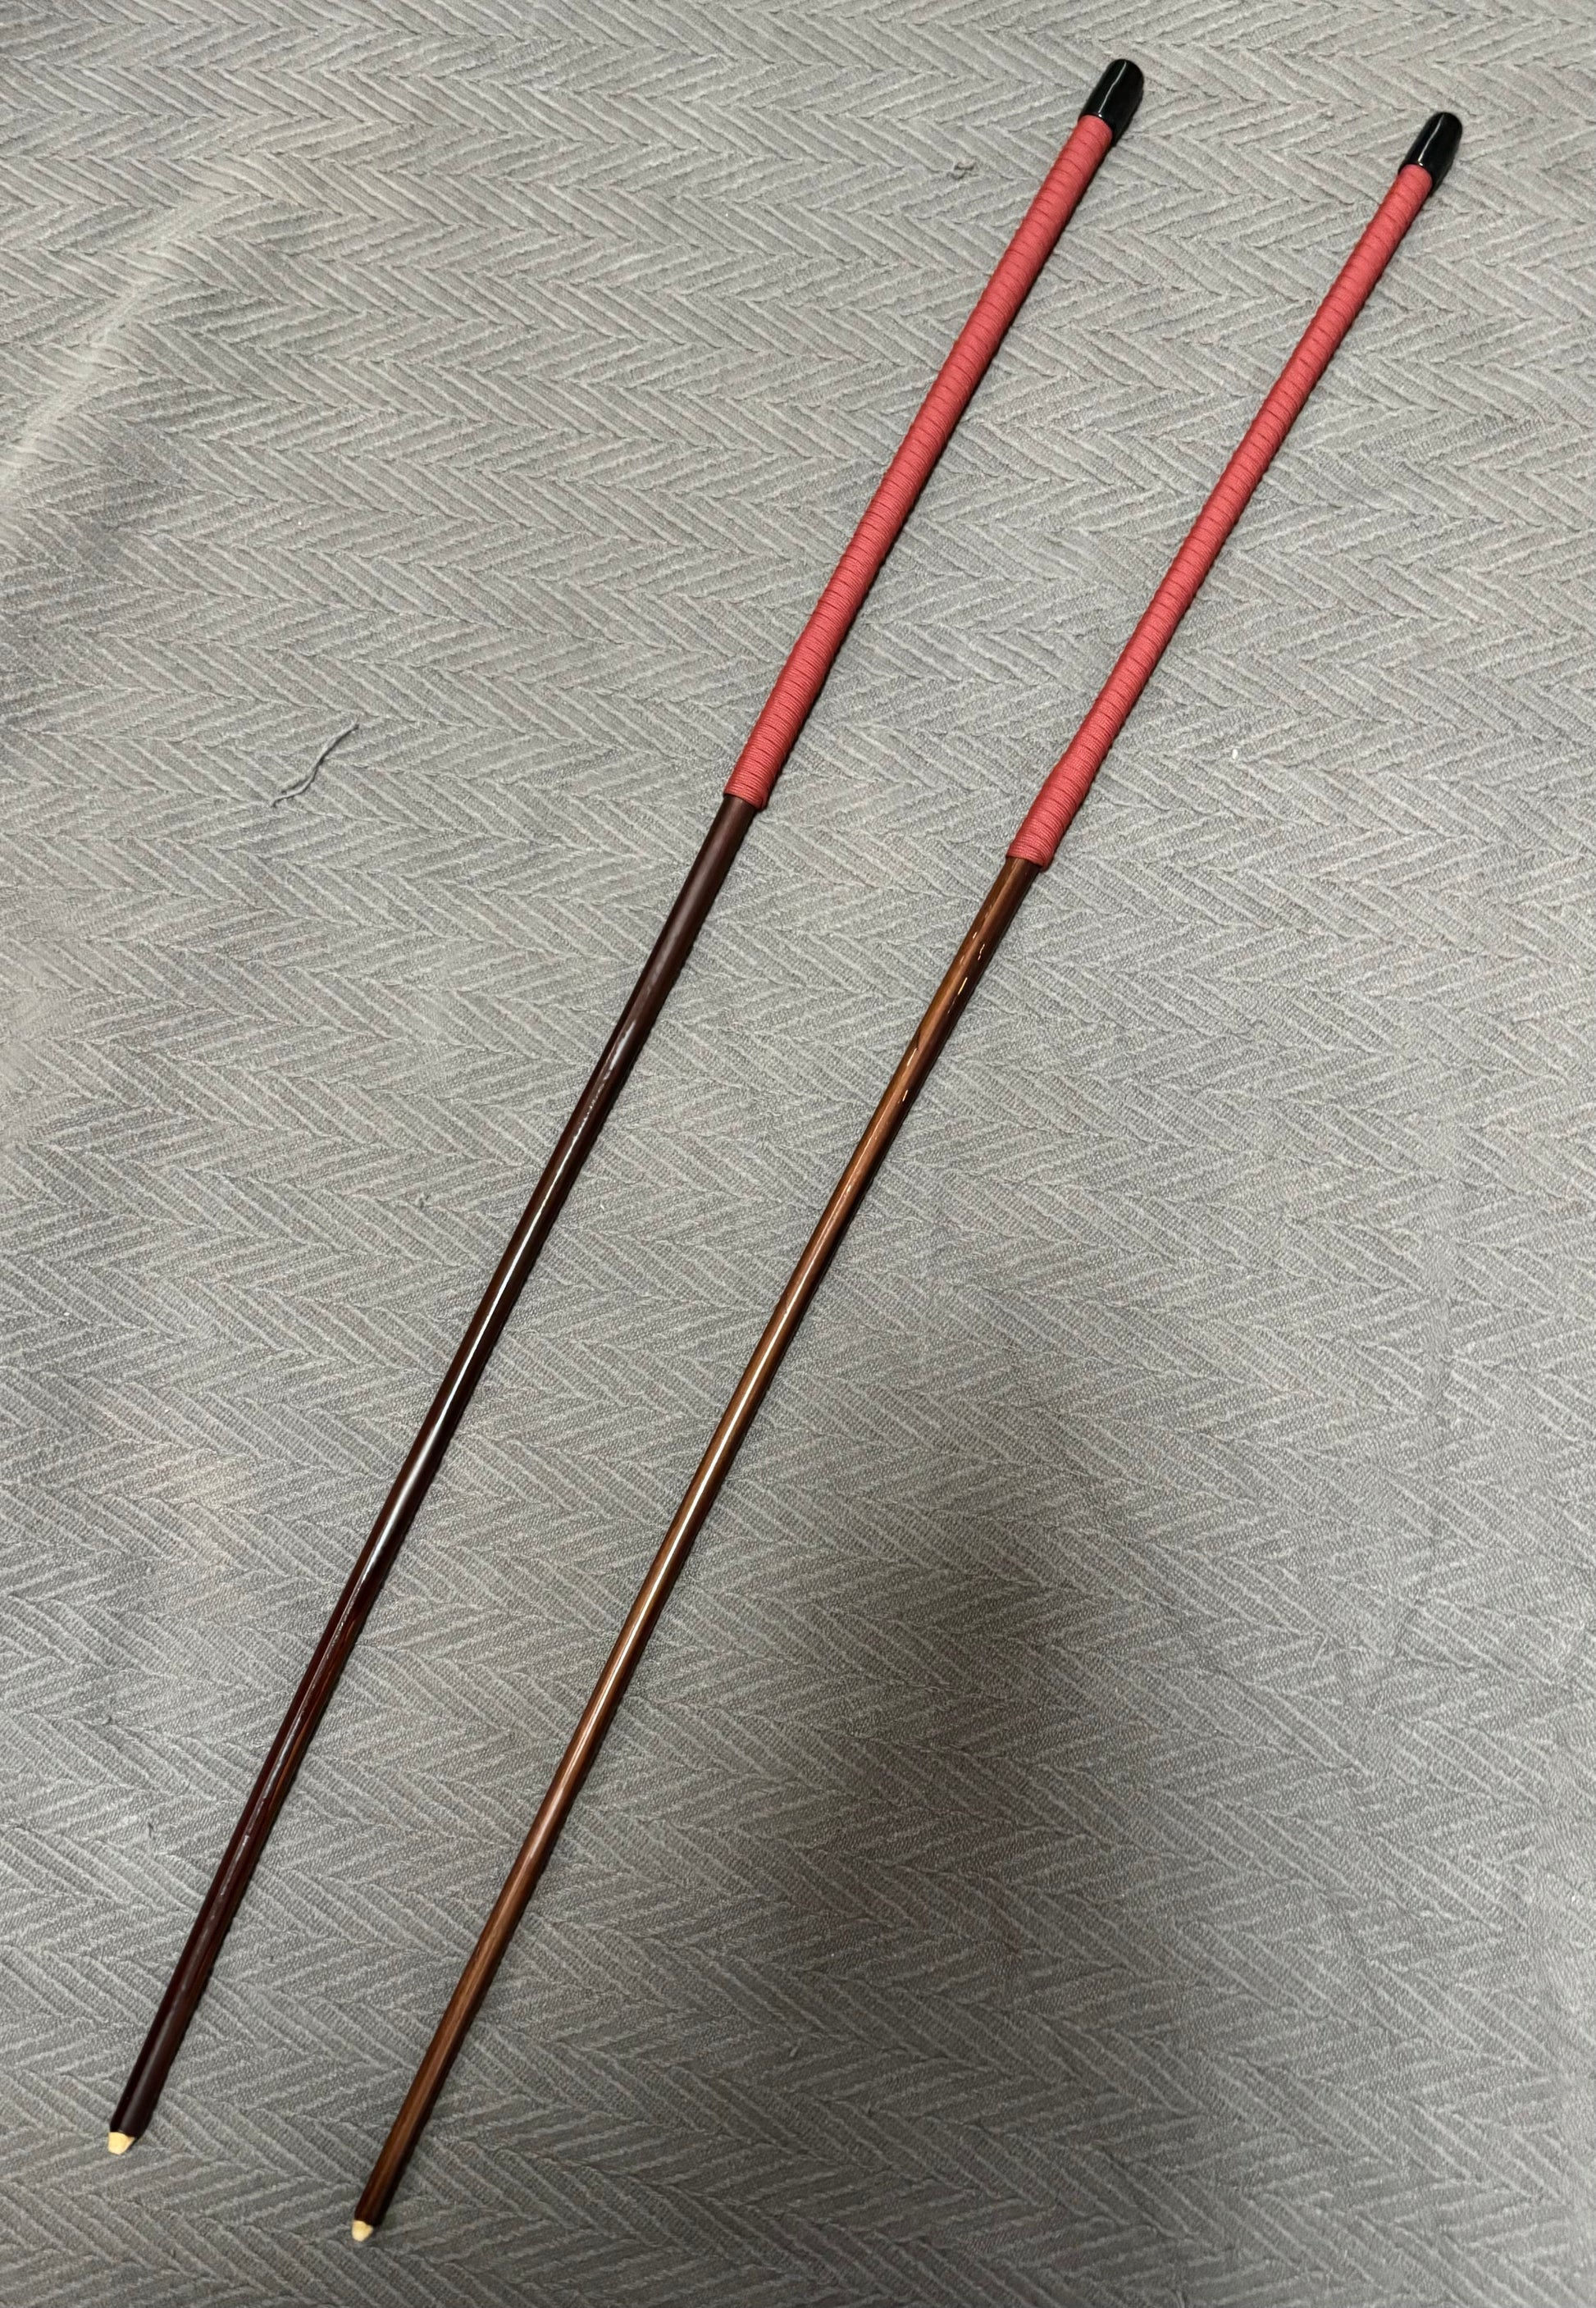 Set of 2 Knotless Smoked Dragon Canes / Ultimate No Knot Smoked Dragon Canes  - 82 to 84 cms Length - BRICK RED Paracord Handles - Englishvice Canes